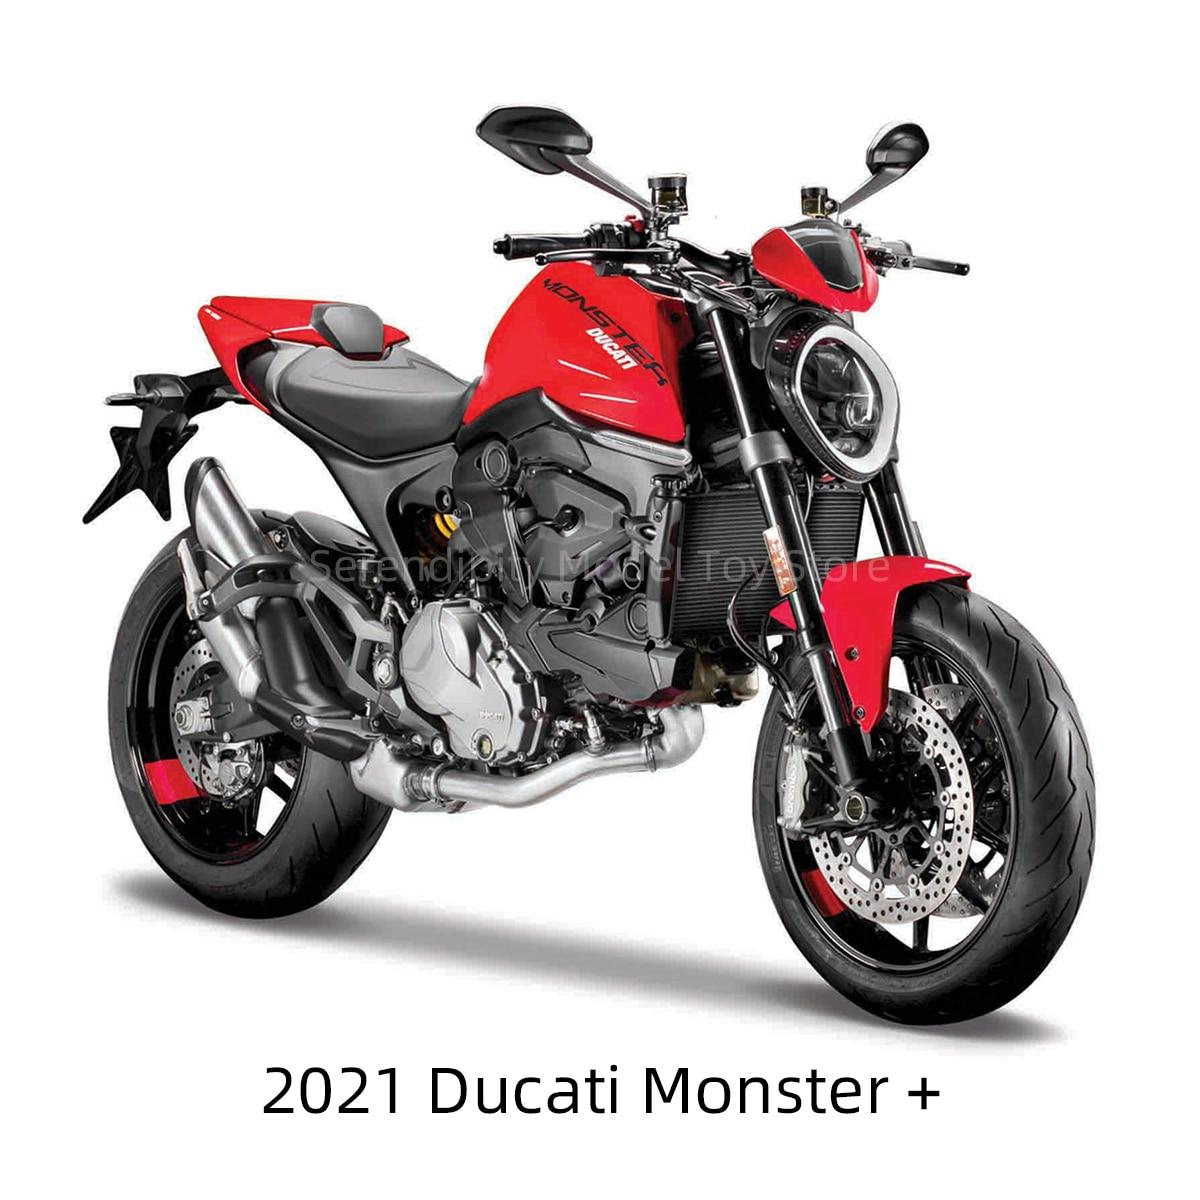 Maisto-1-18-2021-Ducati-Monster-Panigale-V4-S-Corse-Static-Die-Cast-Vehicles-Collectible-Hobbies.jpg